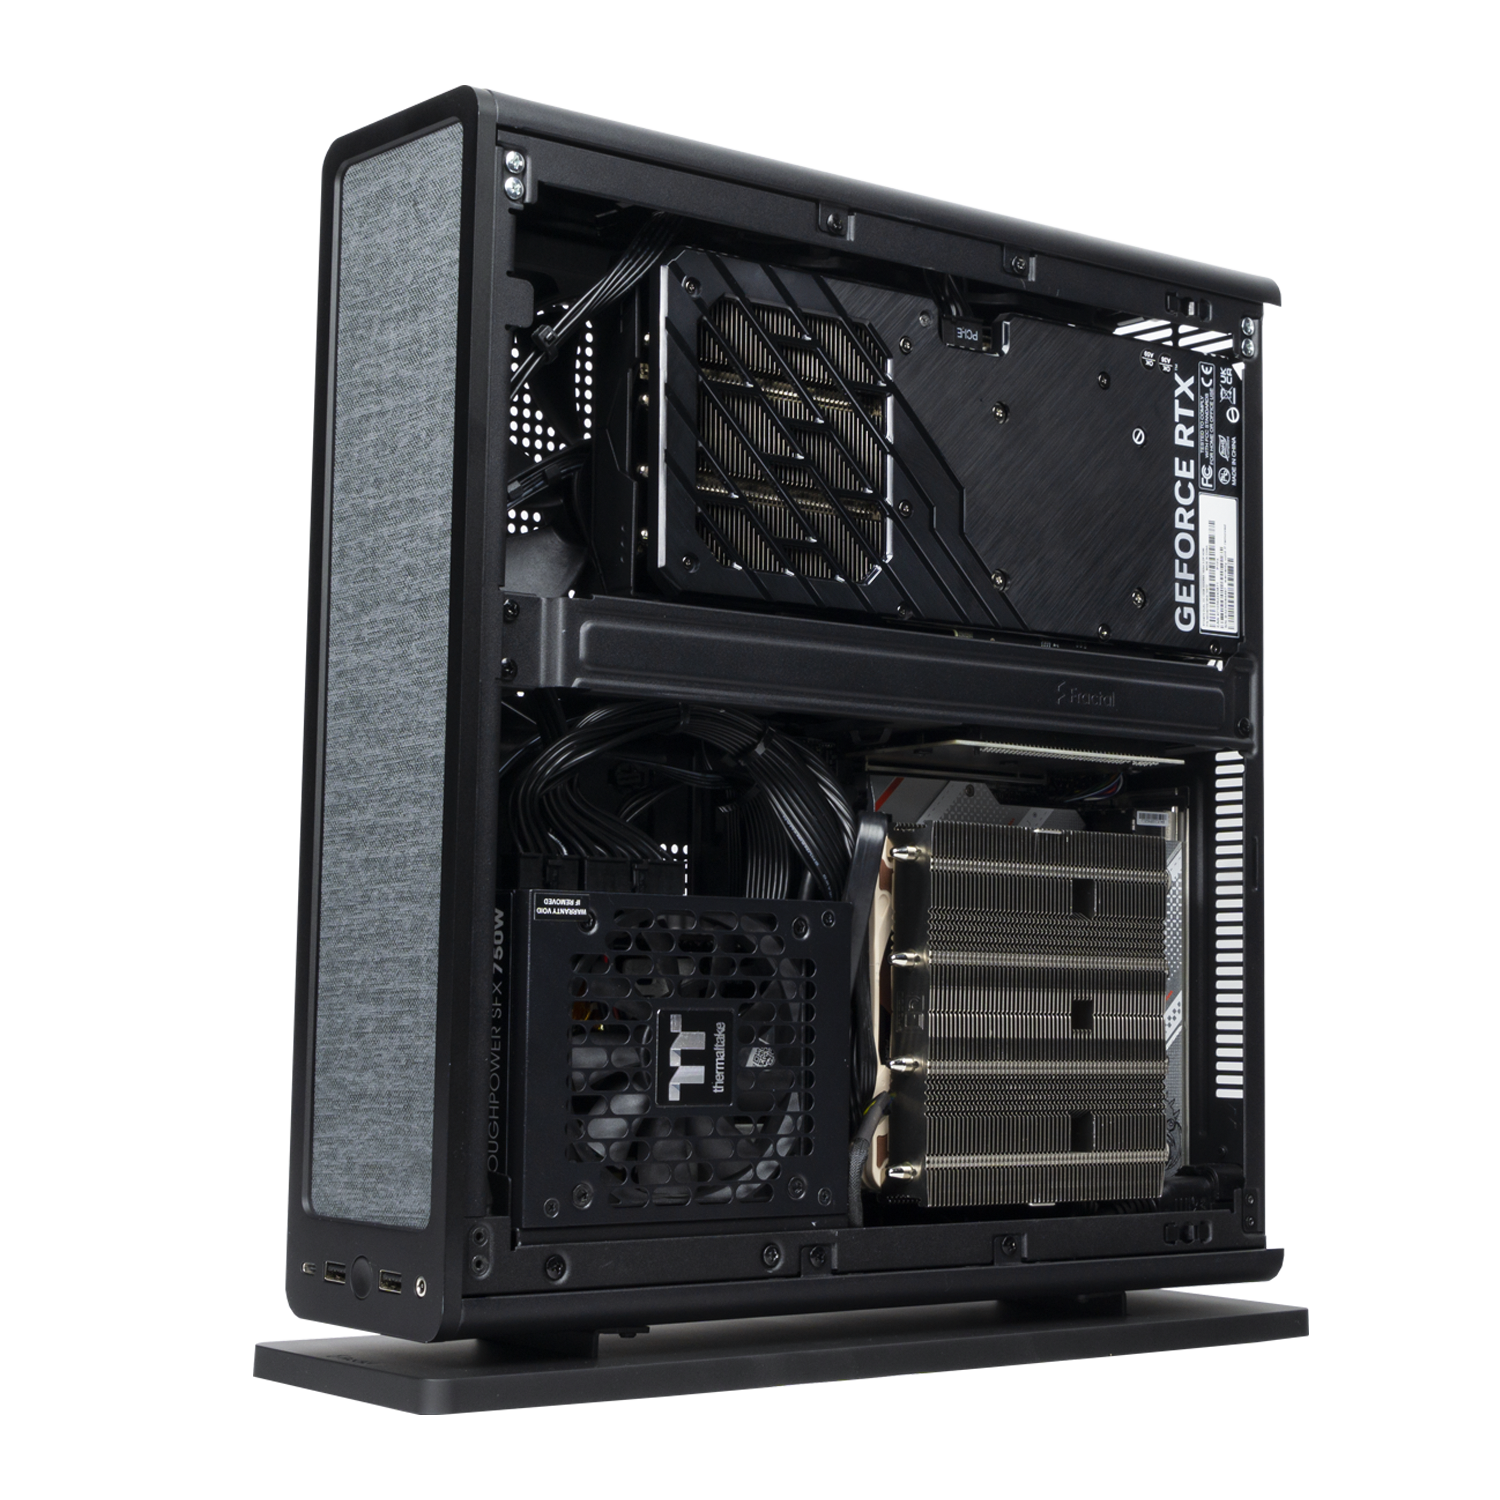 KILLER ELITE CONSOLE - Gaming PC i5 13400 10 core up to 4.60 GHz, RTX 4070 12GB, Ram 32Gb 6000MHz, SSD Nvme 1000GB, Windows 11 Pro